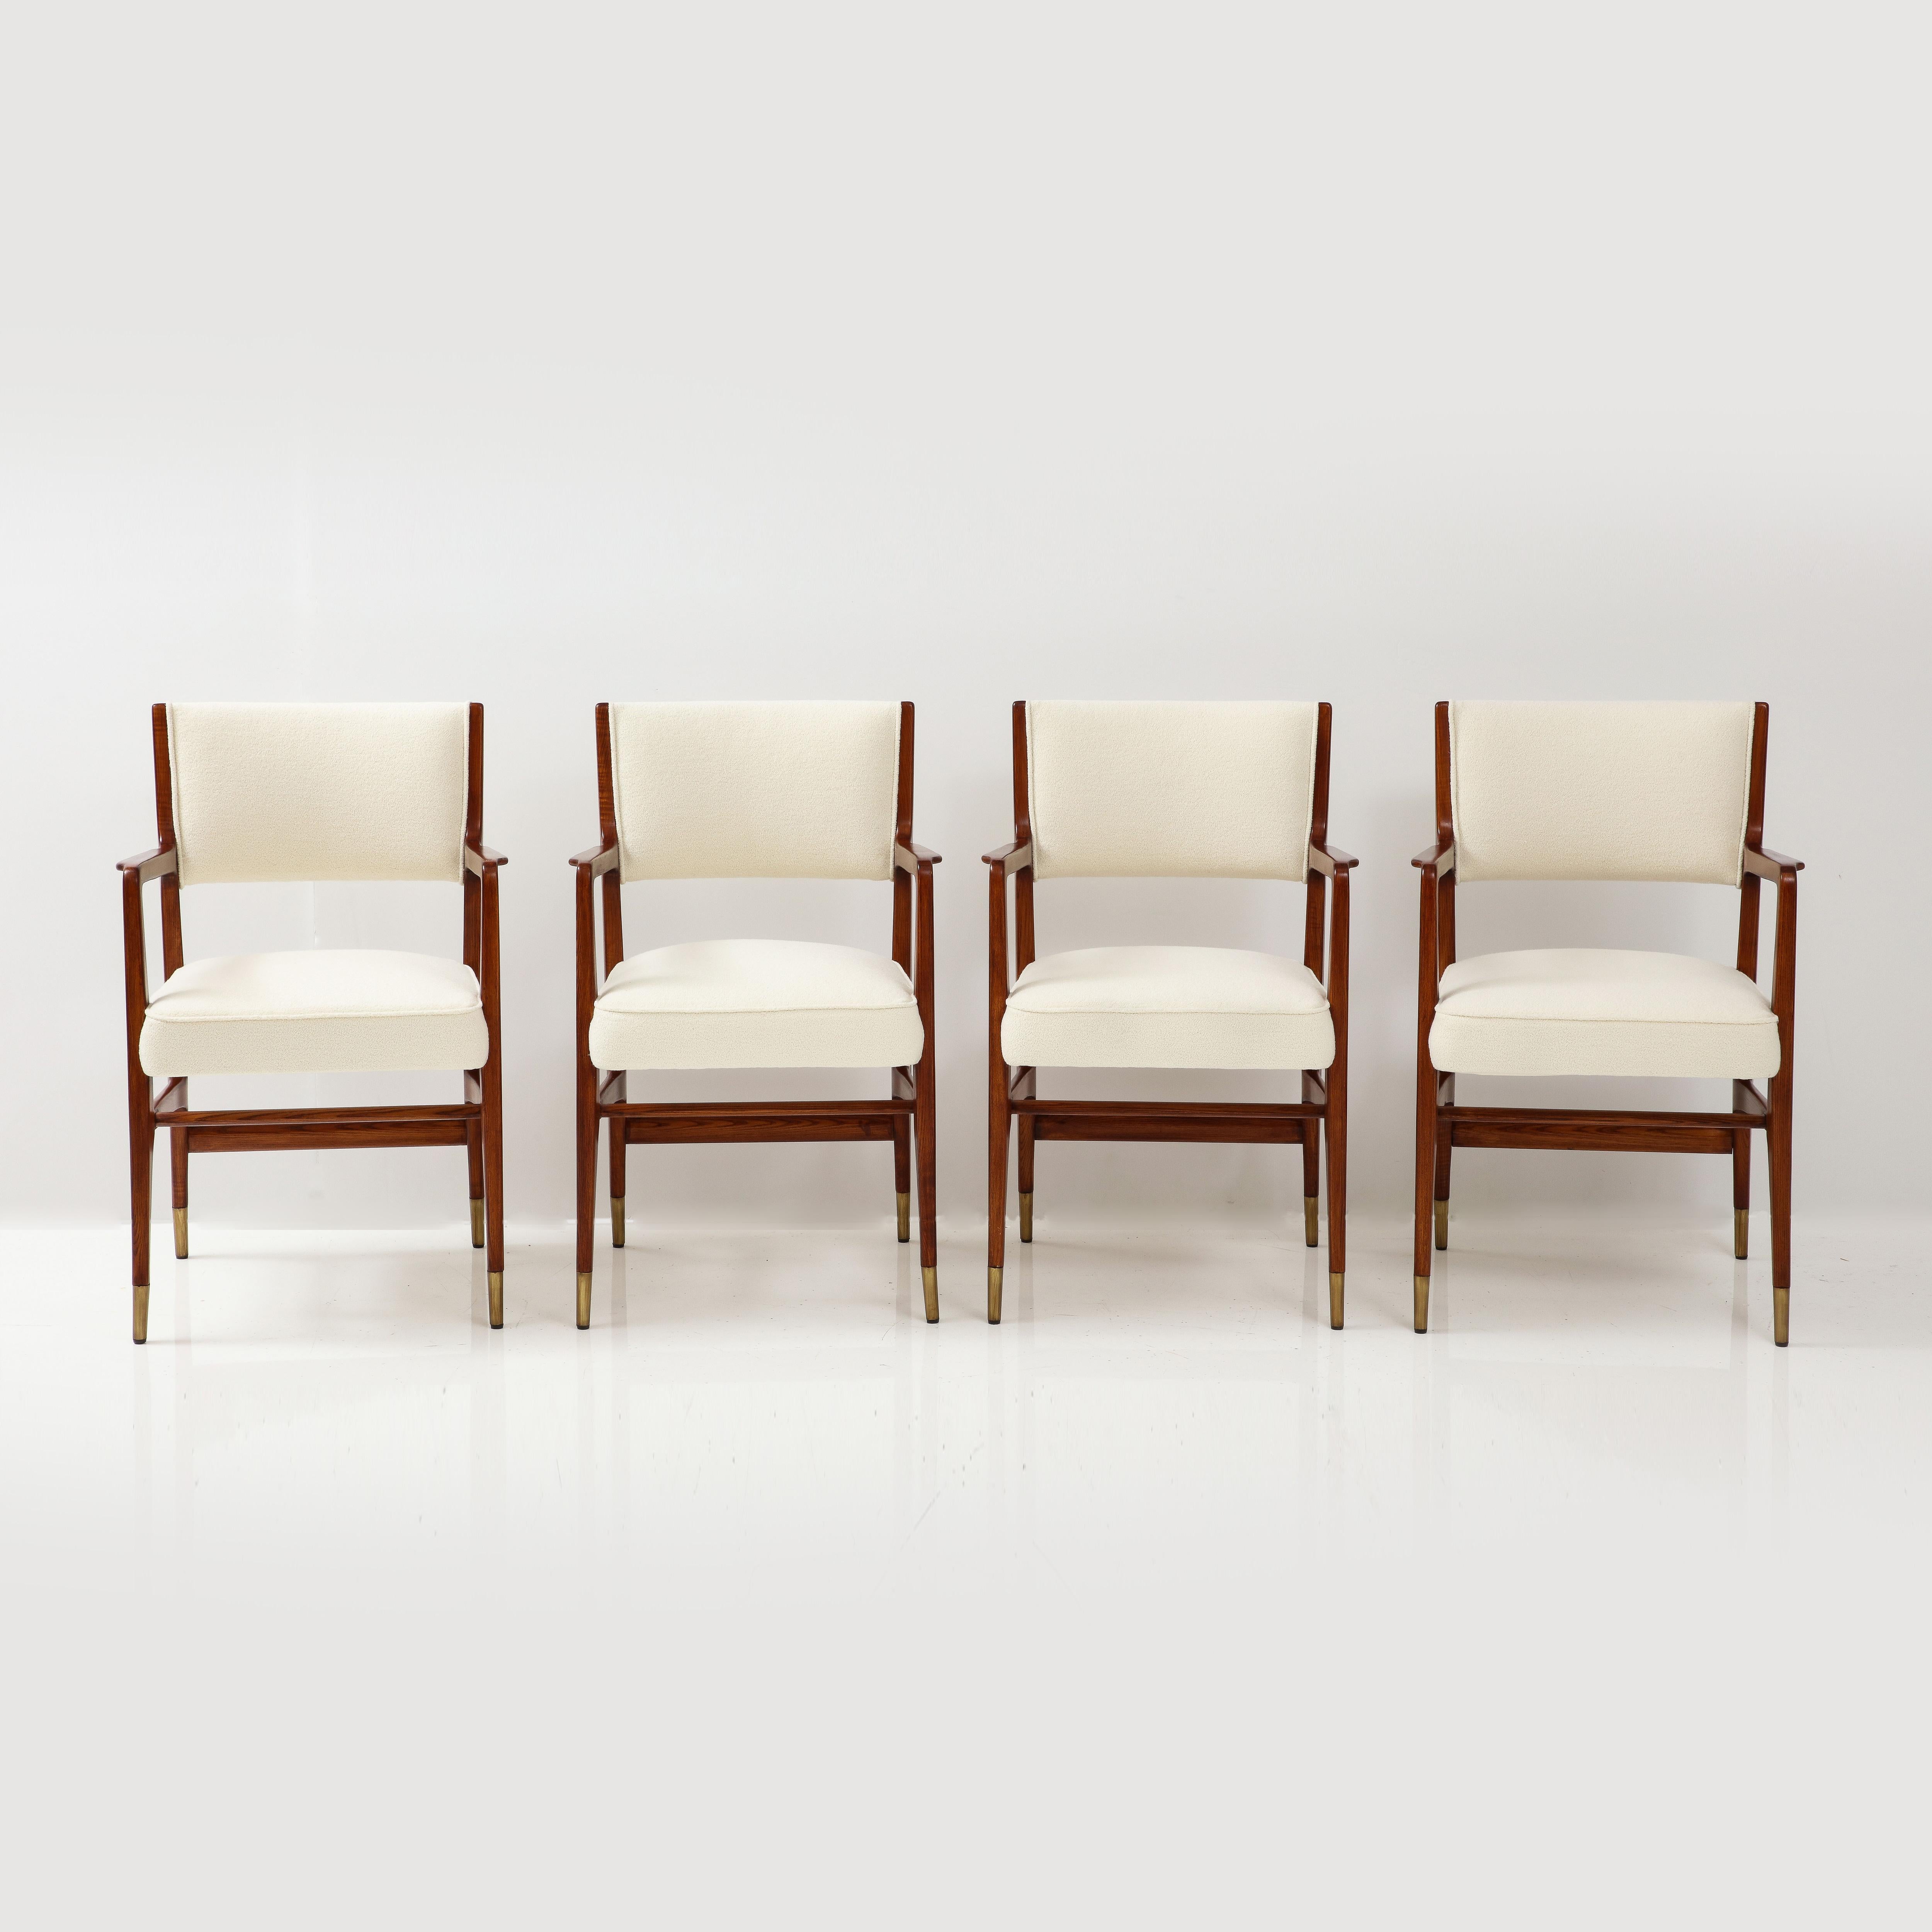 Italian Gio Ponti for Cassina Rare Set of 4 Dining Chairs Model 110 in Ivory Bouclé